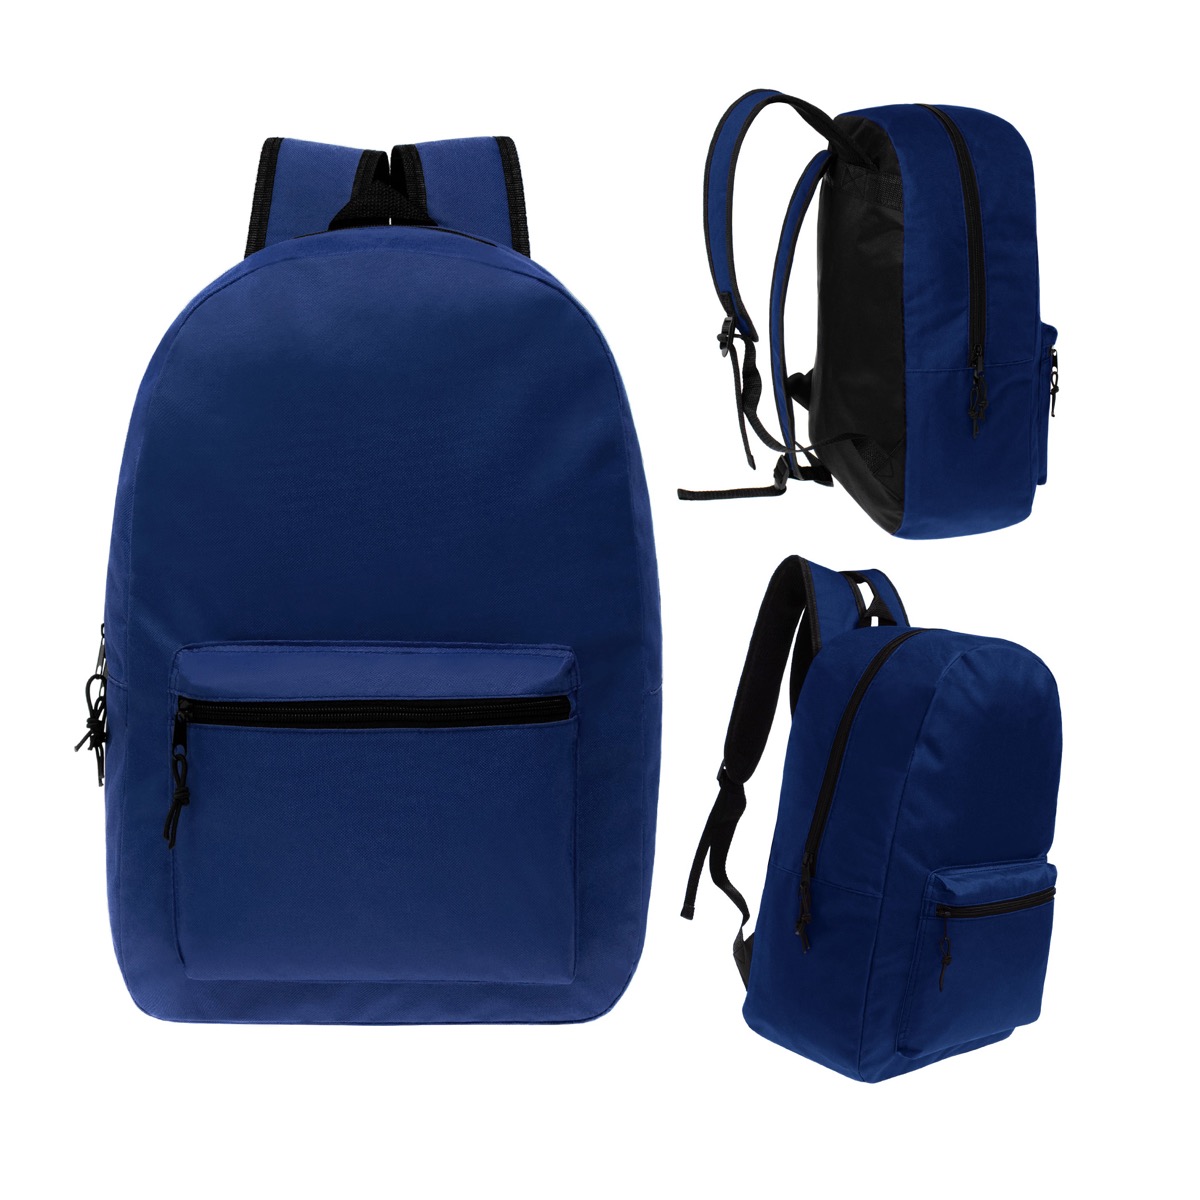 ''17'''' Lightweight Classic Style BACKPACKs w/ Adjustable Paded Straps - Navy Blue''